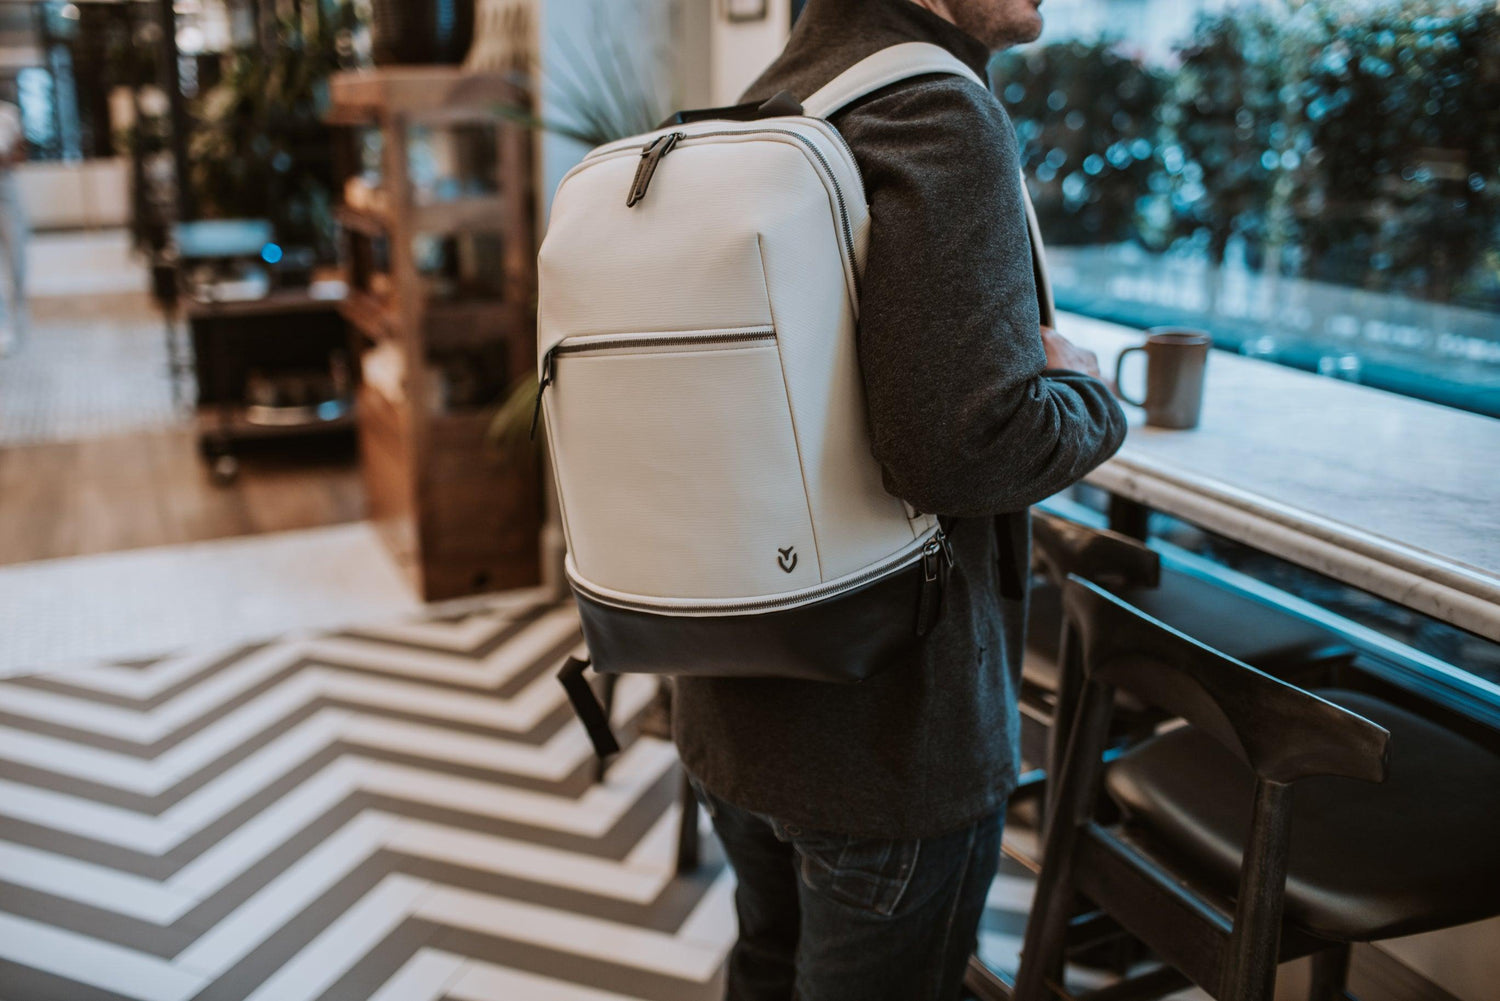 This Vegan Leather Laptop Bag offers a luxury design